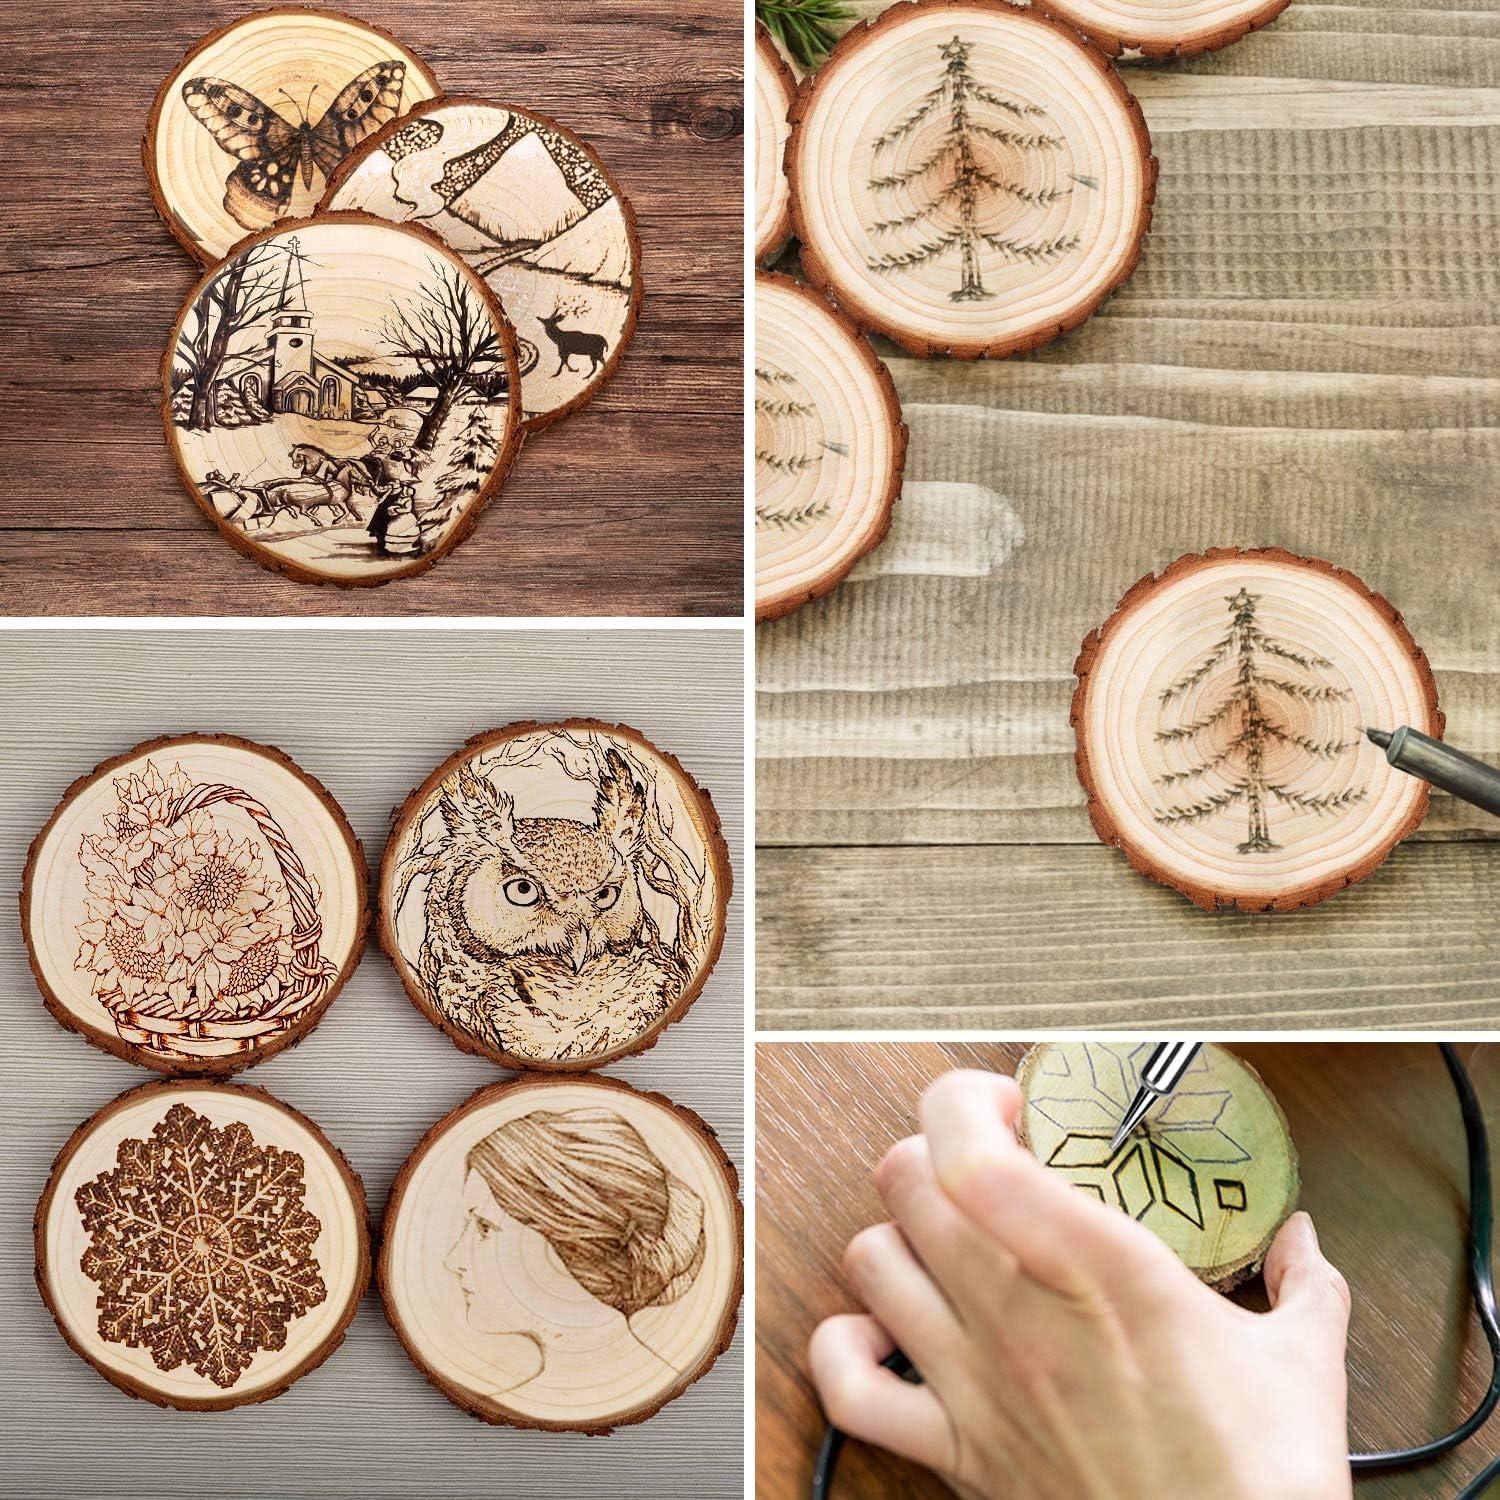 KOHAND 30 PCs 3.6-4 Inch Wood Slices for Crafts,Unfinished Wood Rounds with  Bark, Round Wooden Discs Circles for Christmas Ornaments Wedding Rustic